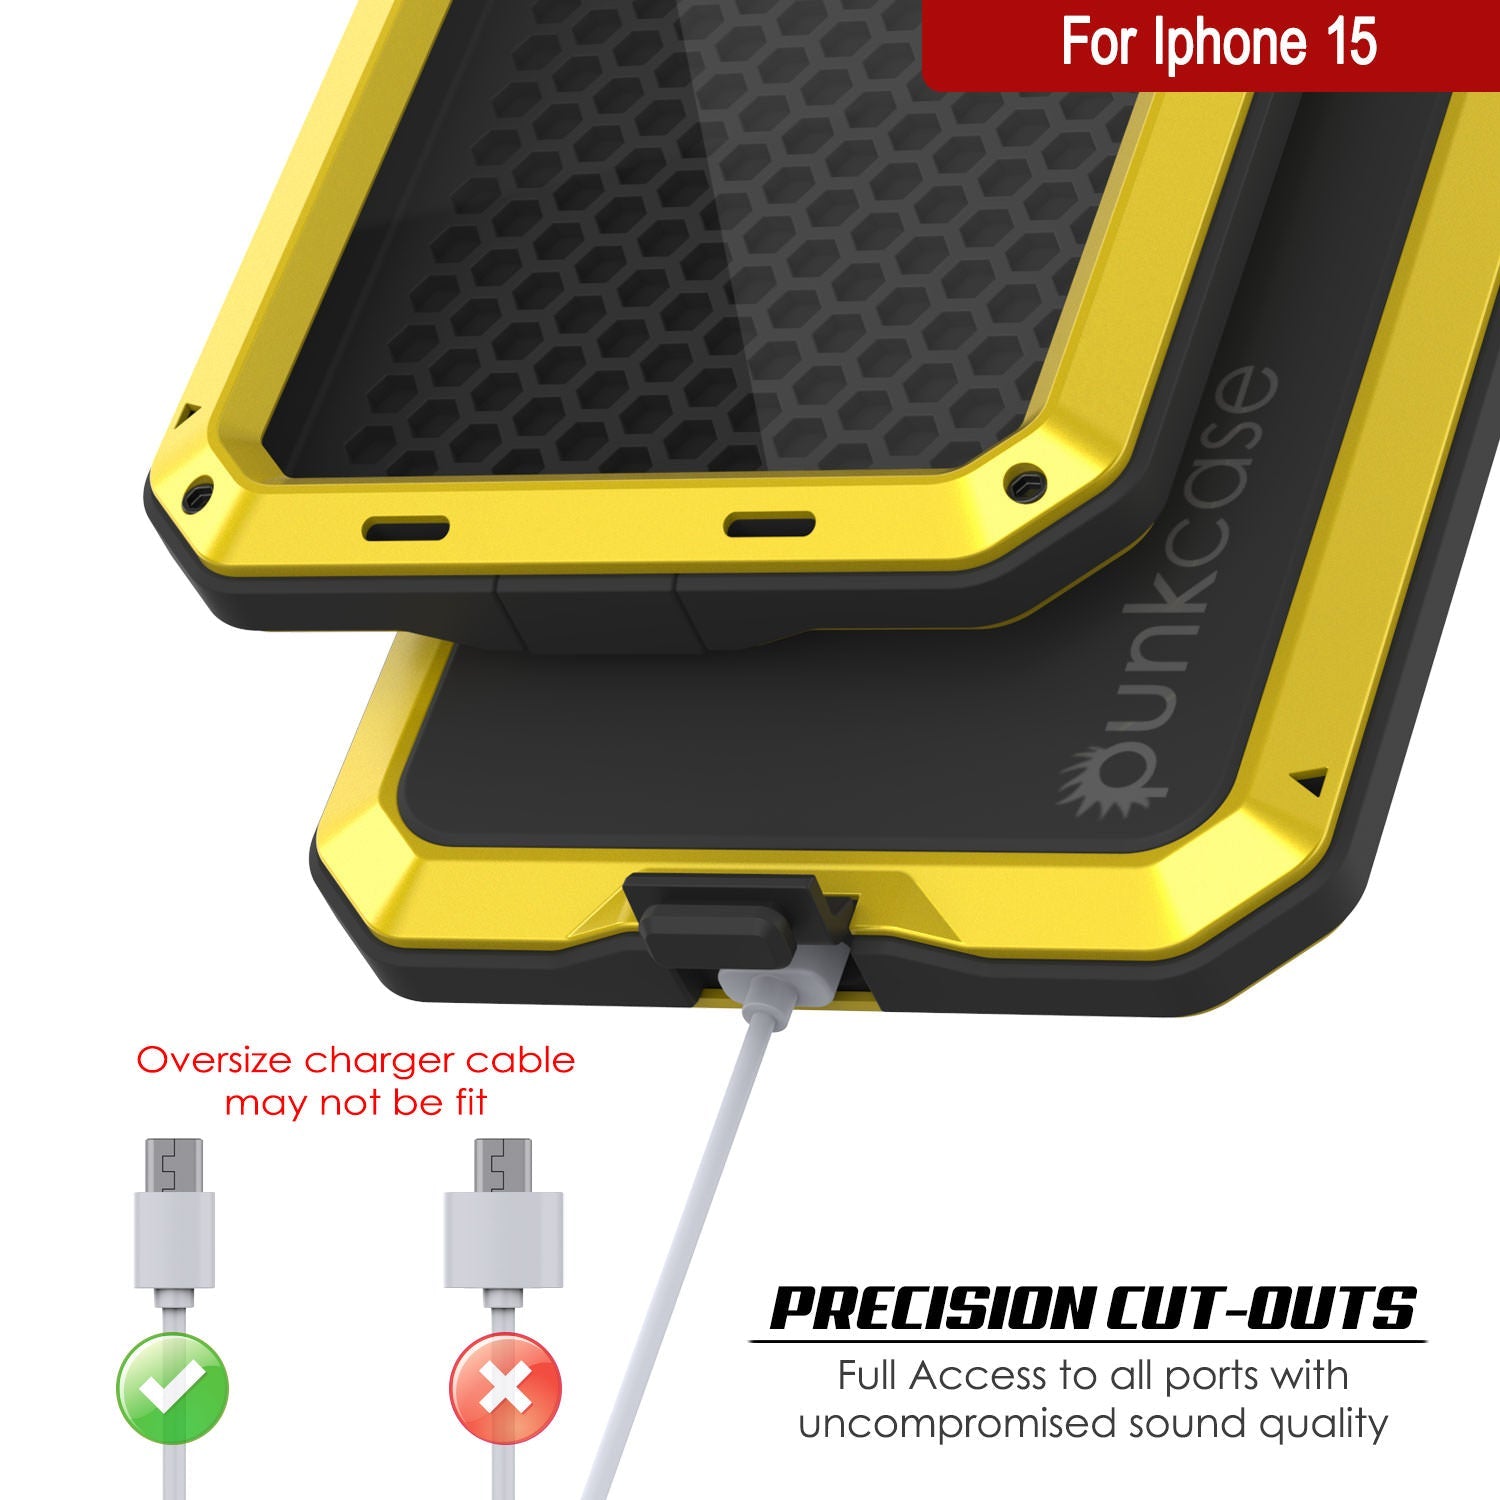 iPhone 15 Metal Case, Heavy Duty Military Grade Armor Cover [shock proof] Full Body Hard [Yellow]